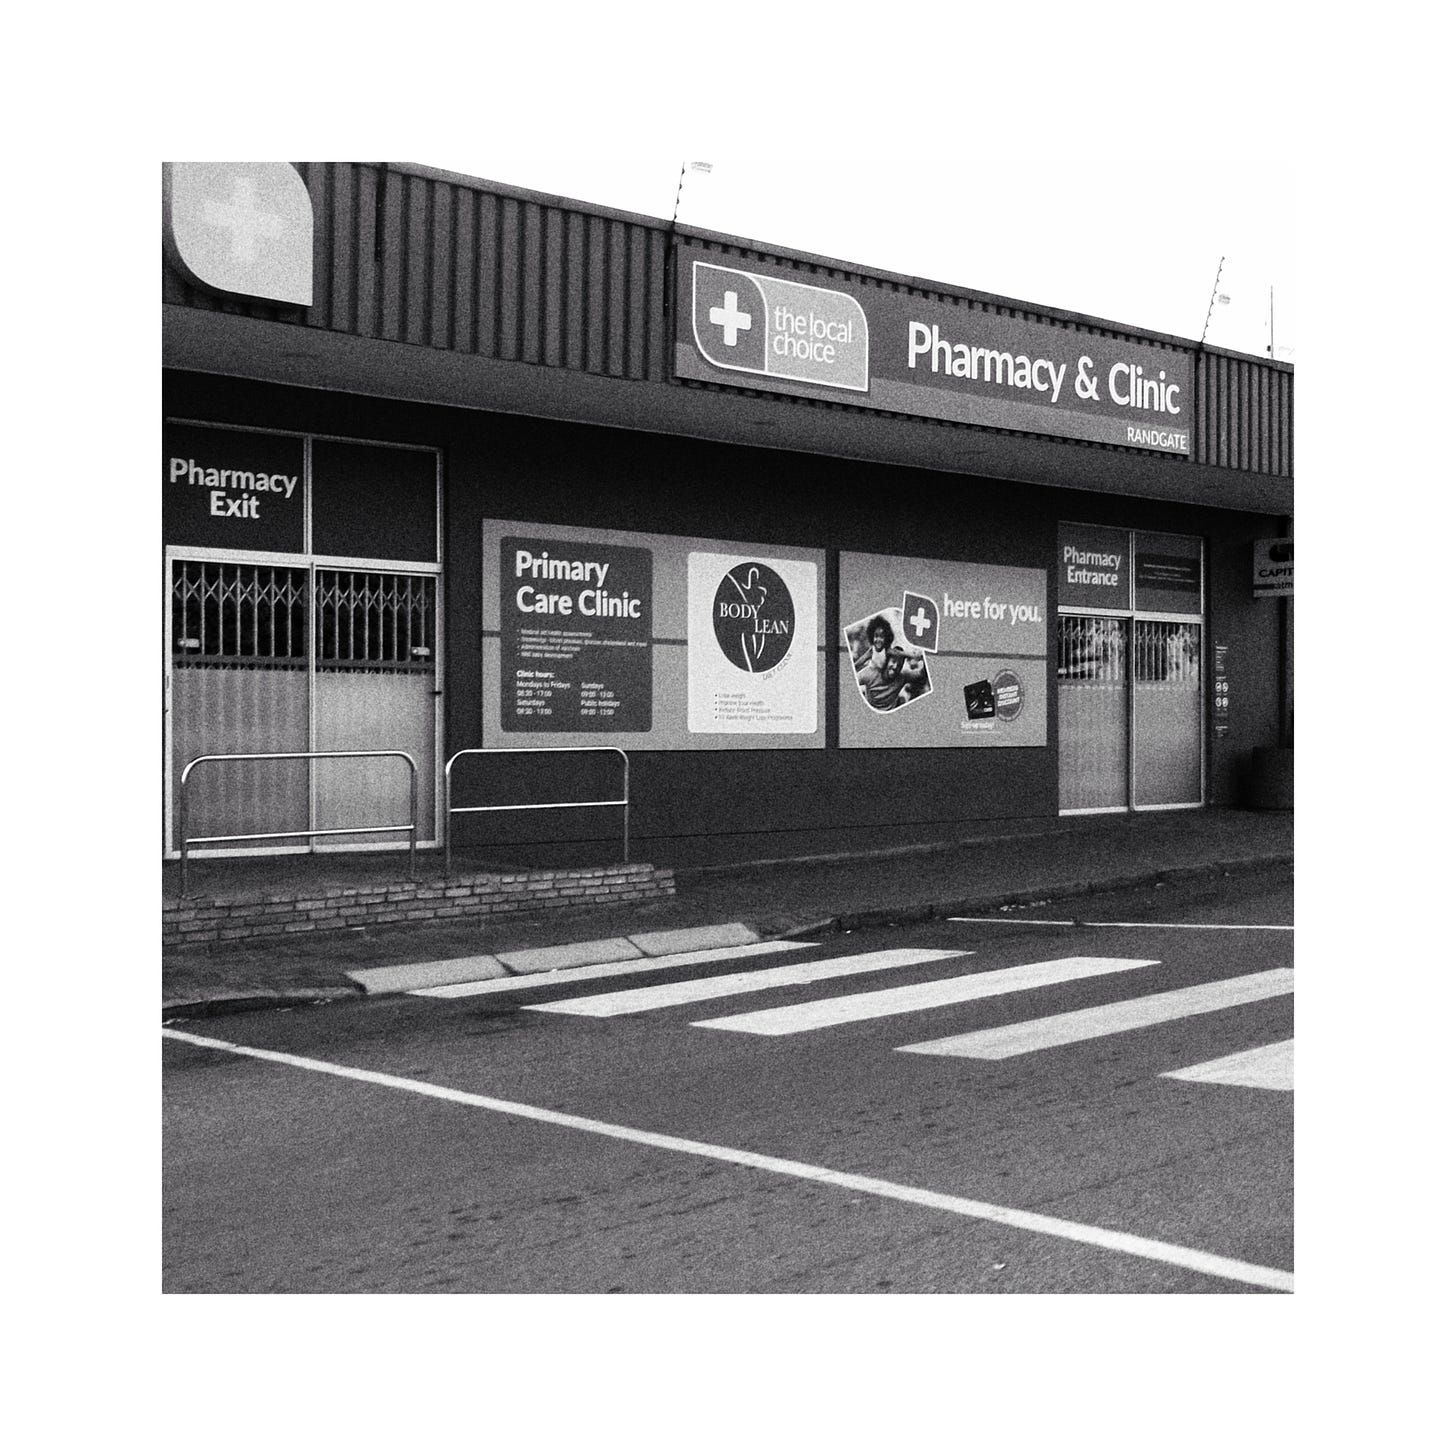 An image of a local pharmacy and clinic. Image in black and white.